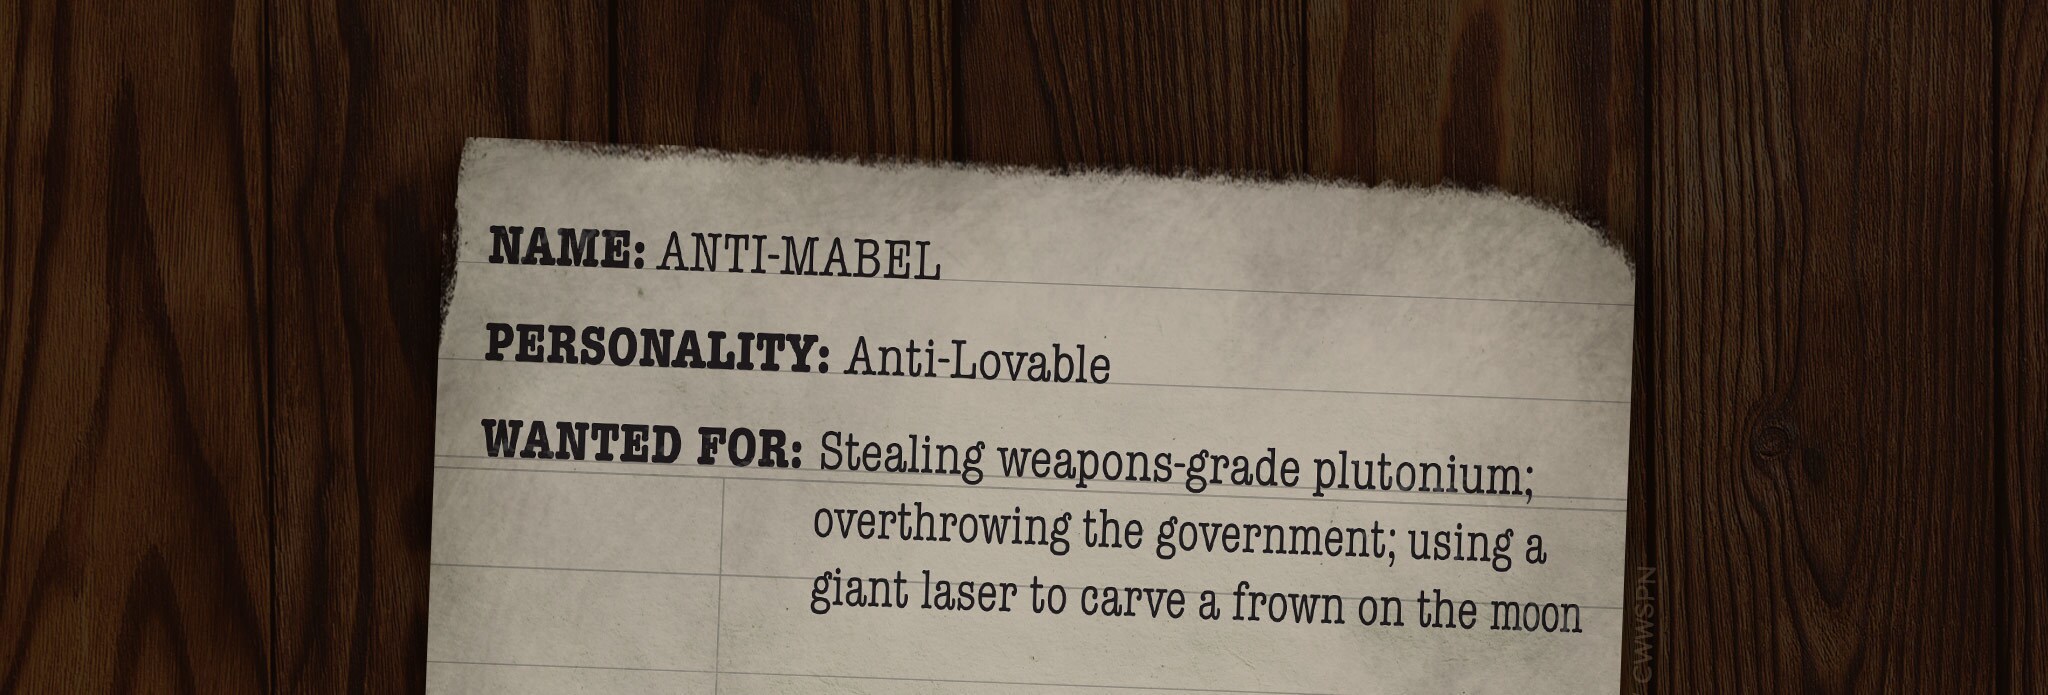 NAME: ANTI-MABEL PERSONALITY: Anti-Lovable WANTED FOR: Stealing weapons-grade plutonium; overthrowing the government; using a giant laser to carve a frown on the moon LIKES: Black coffee; the color beige; German Expressionism; financial newspapers with 0.1-size font; long, tense silences DISLIKES: Liking things FAVORITE FOOD: Picking the rainbow marshmallows out of her Lucky Leprechaun cereal and just eating the grain part. Without milk. ACQUAINTANCES: Anti-Dipper (an incorrigible flirt); Anti-Stan (a charity-obsessed hippie); Anti-Ford (wannabe YouTube star/part time DJ); Anti-Soos (Forbes billionaire); Anti-Waddles (the first pig to ever go to jail for armed robbery) CURRENT LOCATION: Revenge-plotting her way through the mindscape